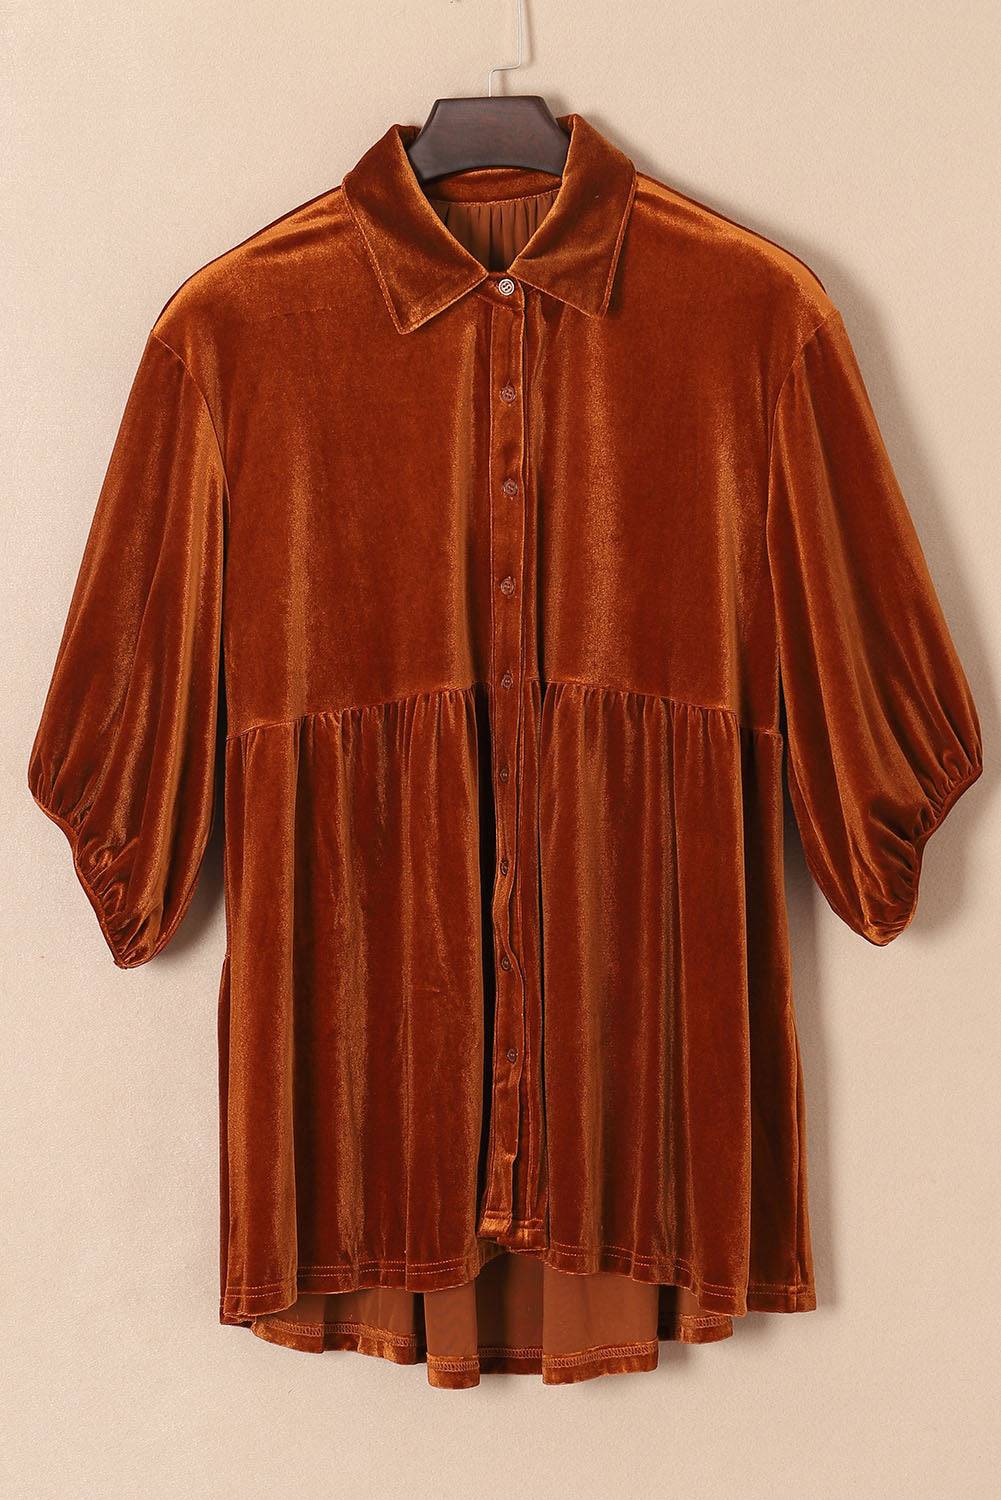 a brown shirt hanging on a hanger